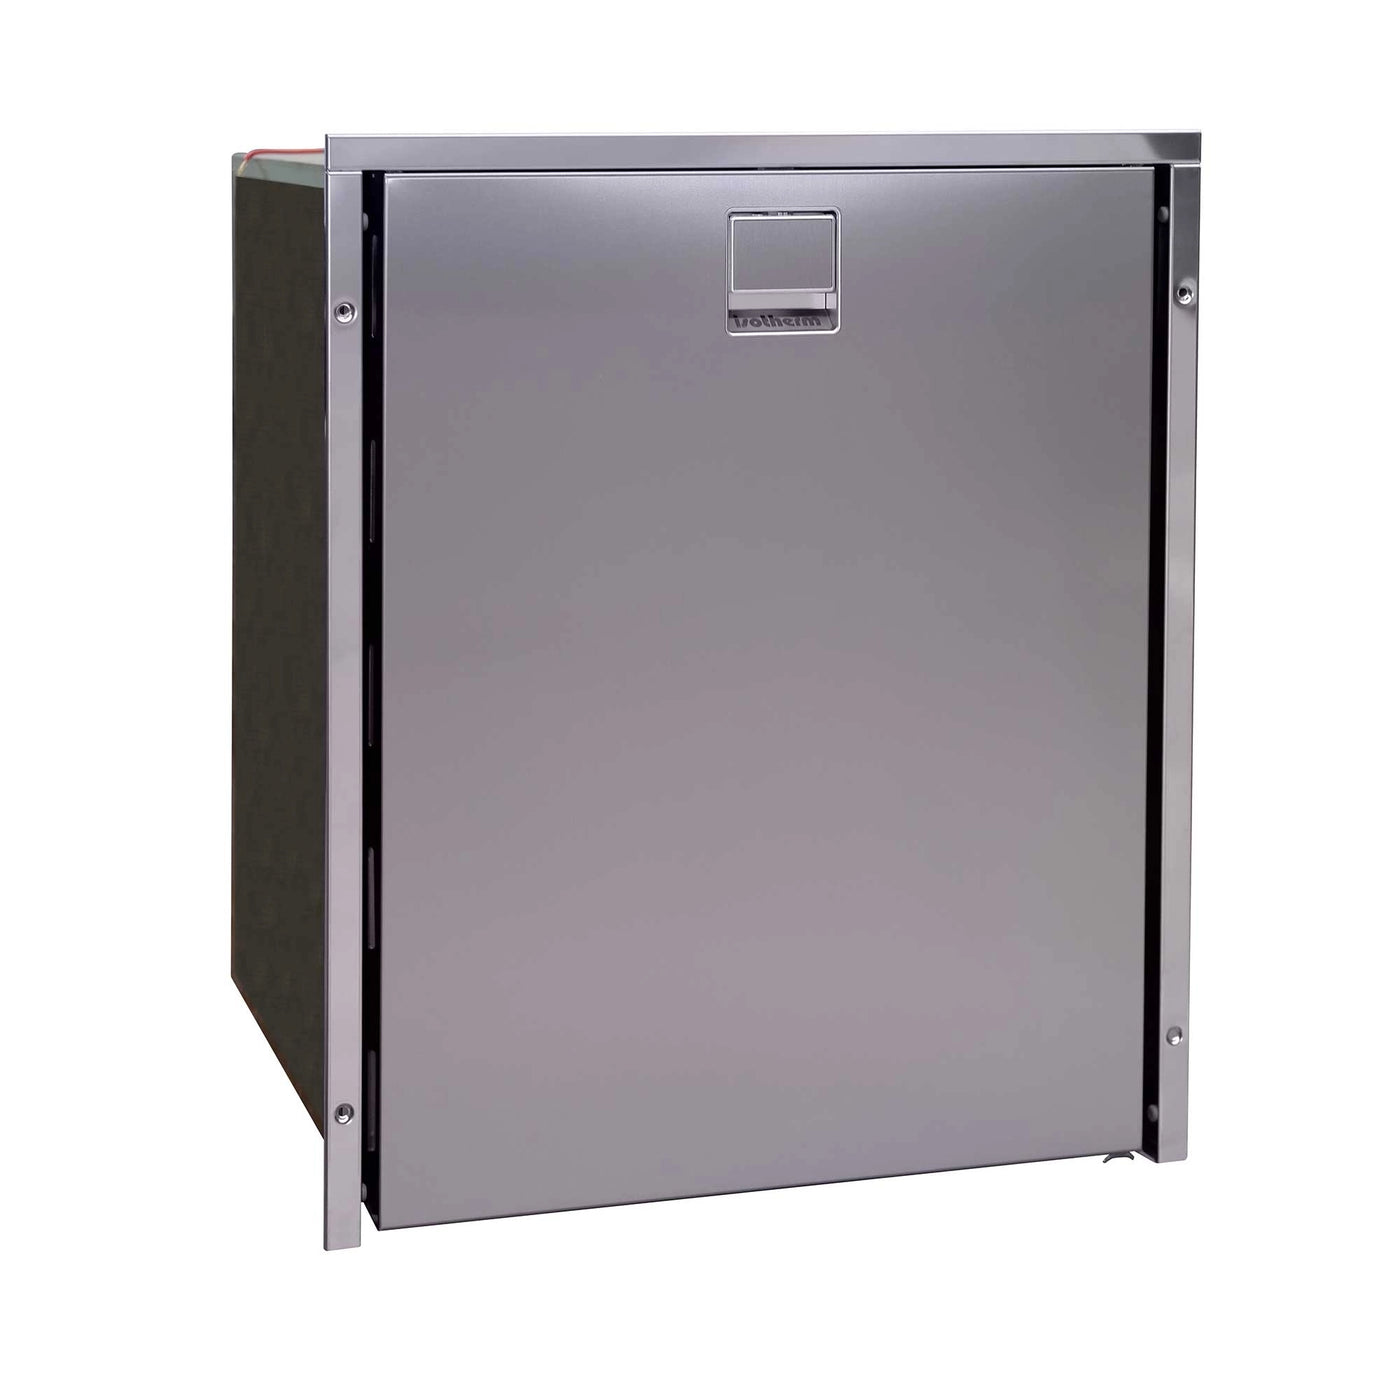 Isotherm Cruise 85 Clean Touch Stainless Steel Refrigerator C085RNGIT71113AA